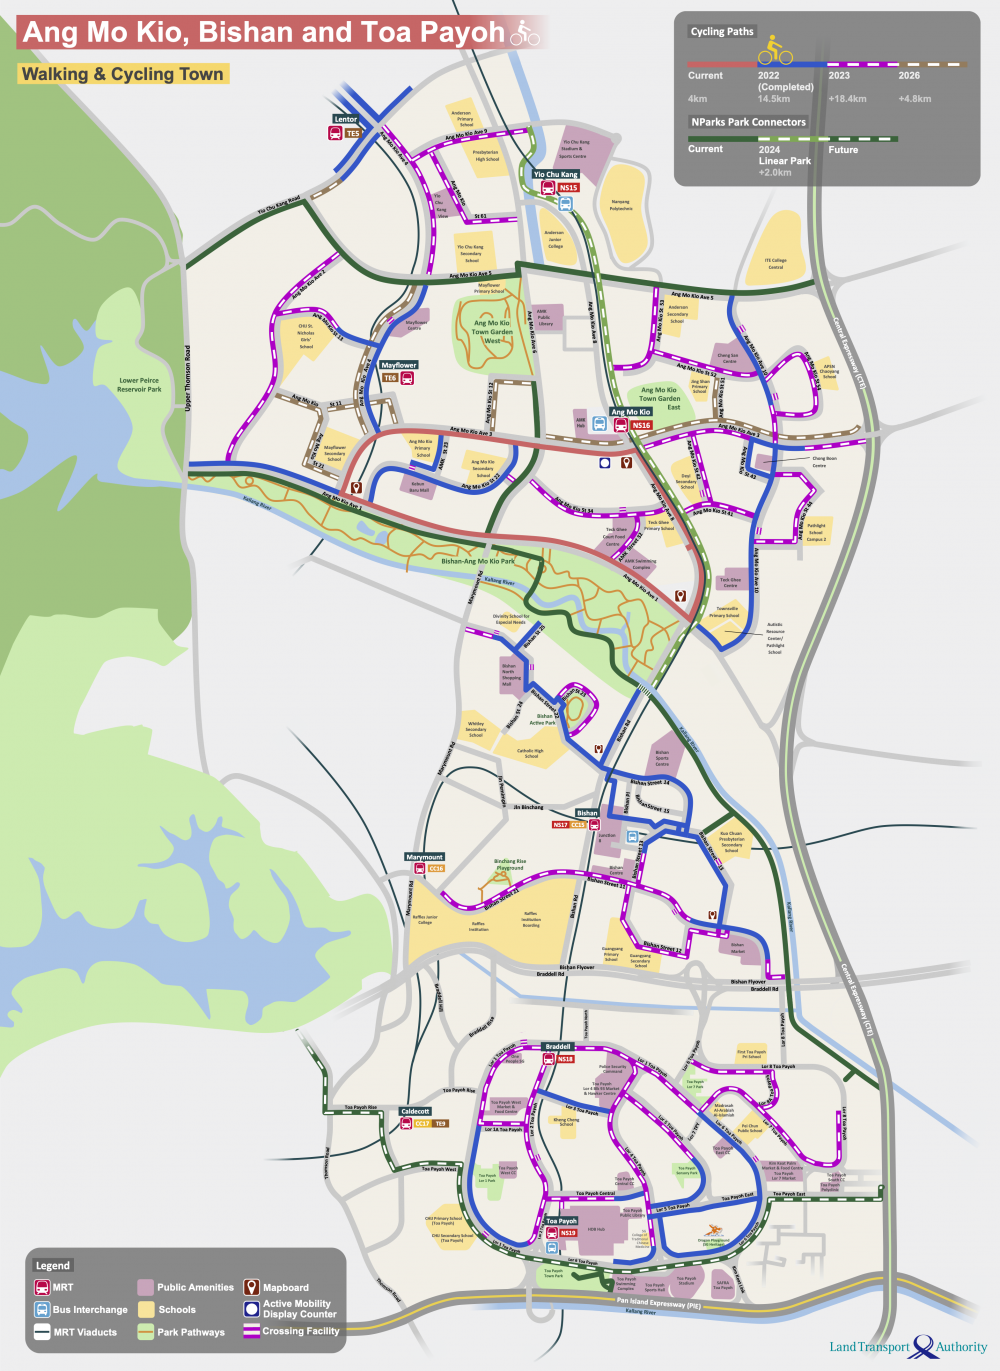 Annex-A-Map-of-Cycling-Paths-in-AMK-Bishan-TPY-Towns-e1664625336524.png